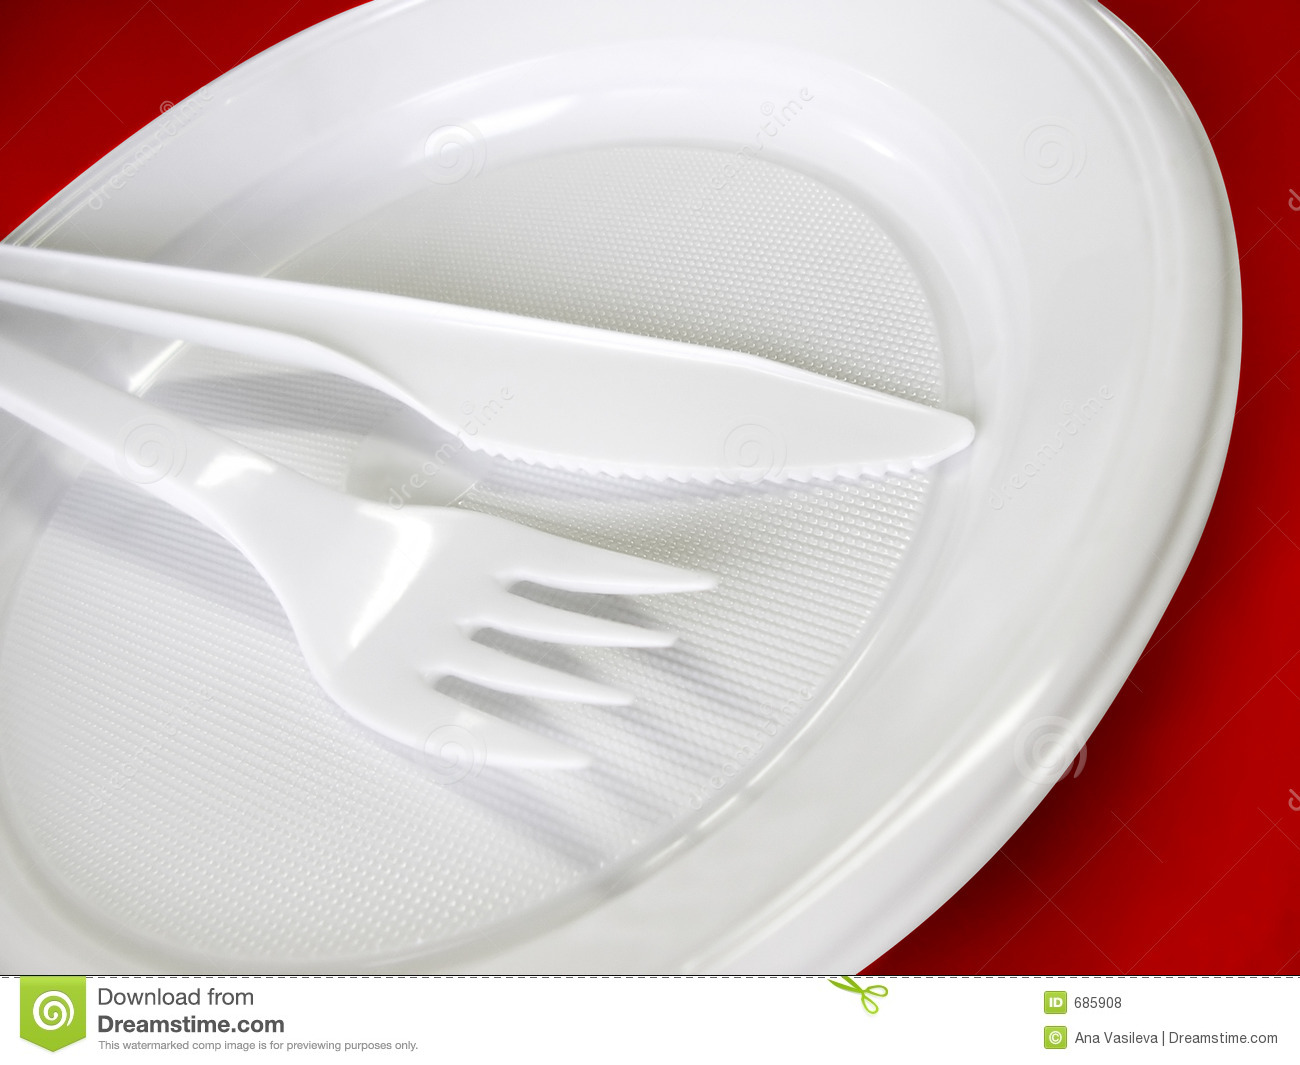 Plastic Tableware   Knife Fork And Plate Royalty Free Stock Photos    